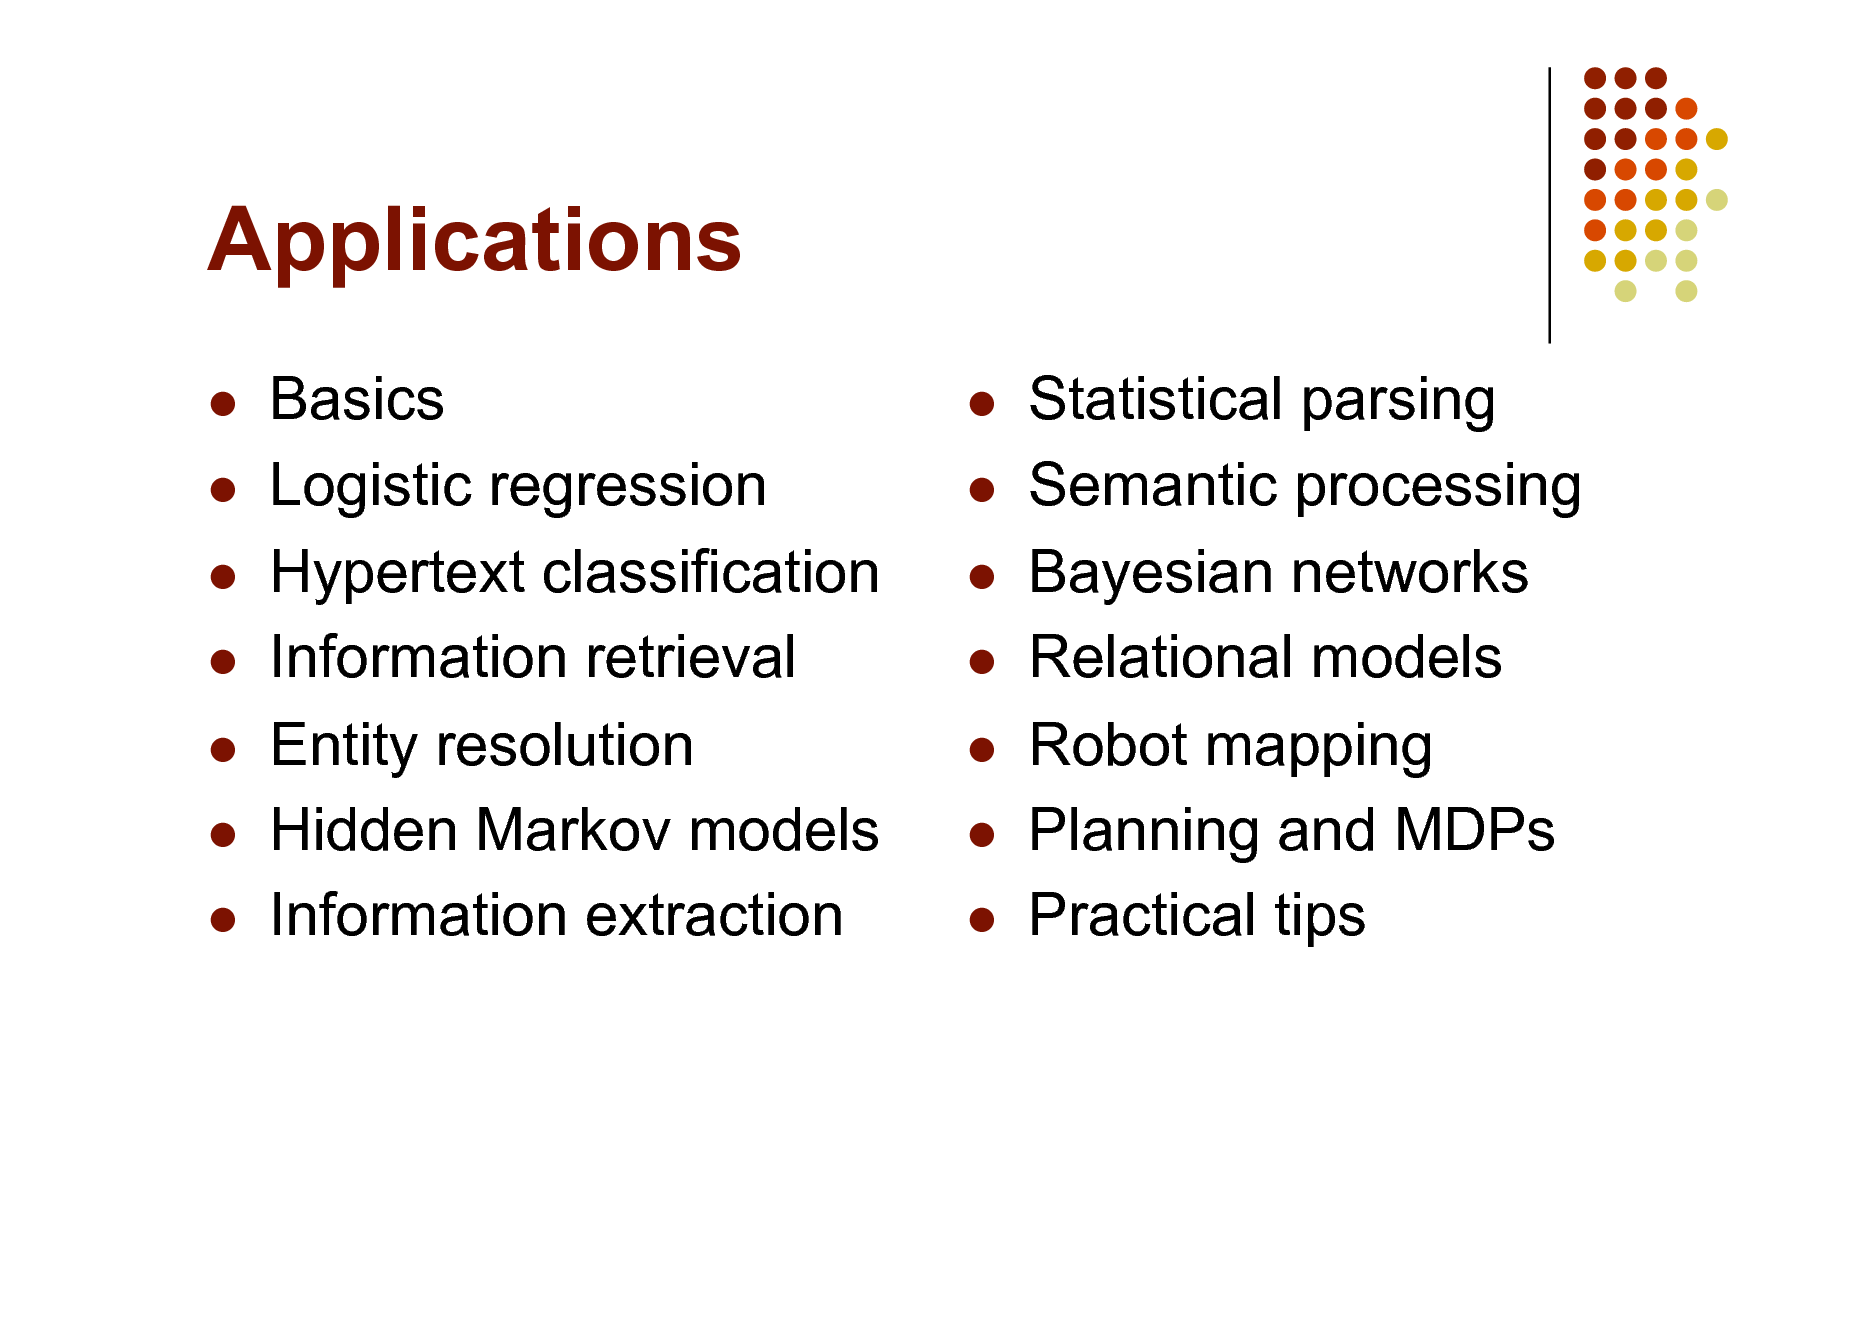 Slide: Applications
      

Basics Logistic regression Hypertext classification Information retrieval Entity resolution Hidden Markov models Information extraction

      

Statistical parsing Semantic processing Bayesian networks Relational models Robot mapping Planning and MDPs Practical tips

